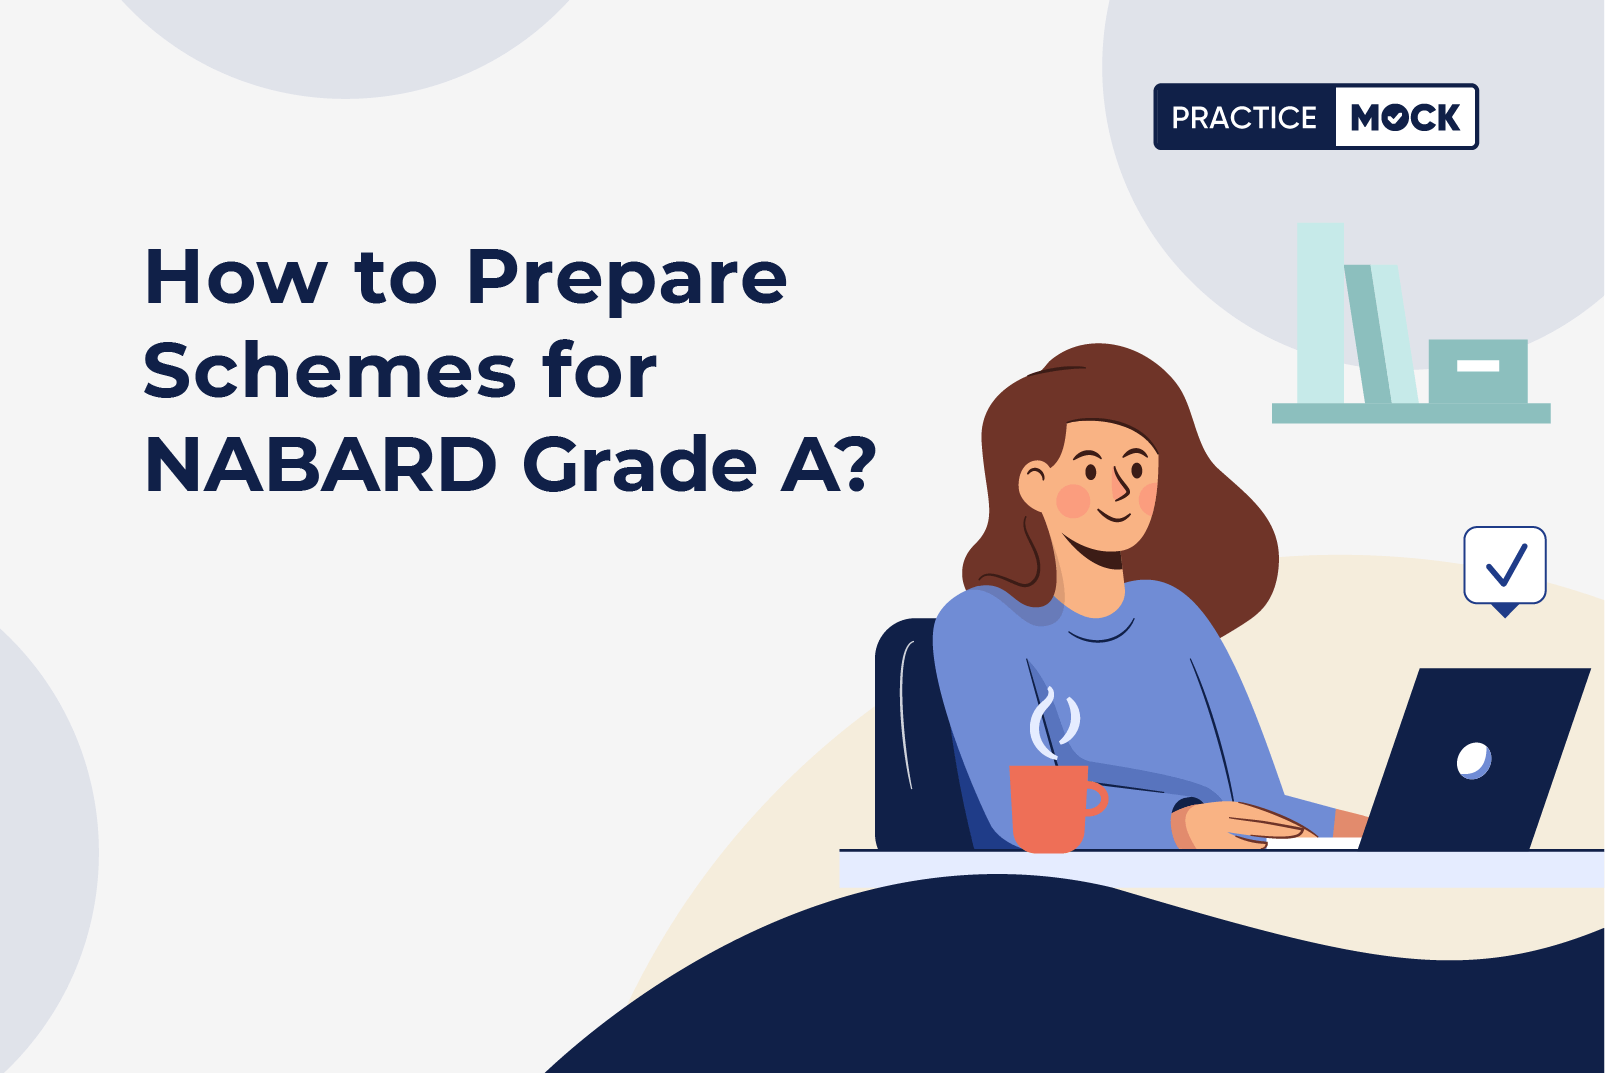 How to prepare schemes for NABARD Grade A